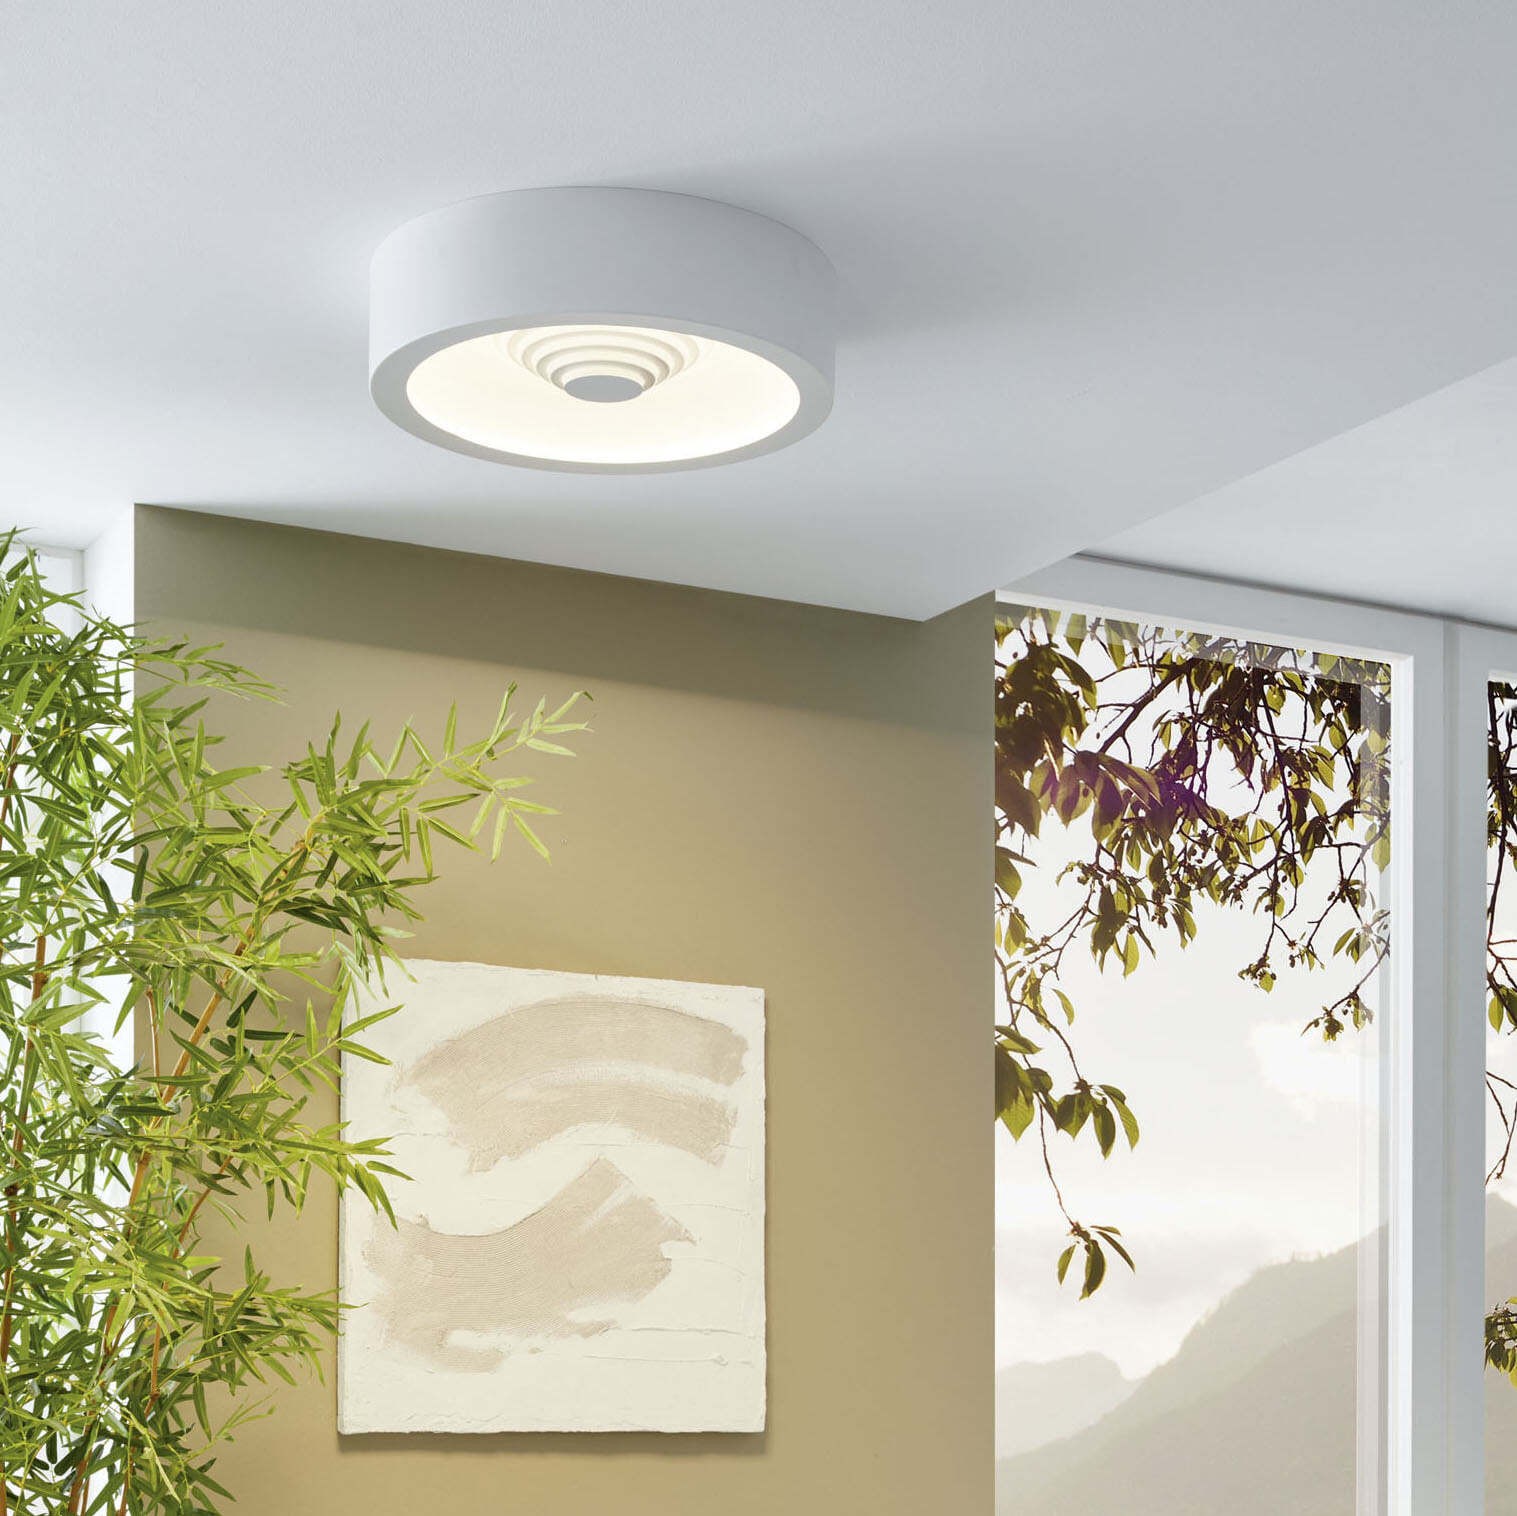 129,95 € Free Shipping | Indoor ceiling light Eglo Leganes 25.5W 3000K Warm light. Ø 45 cm. Steel and plastic. White Color